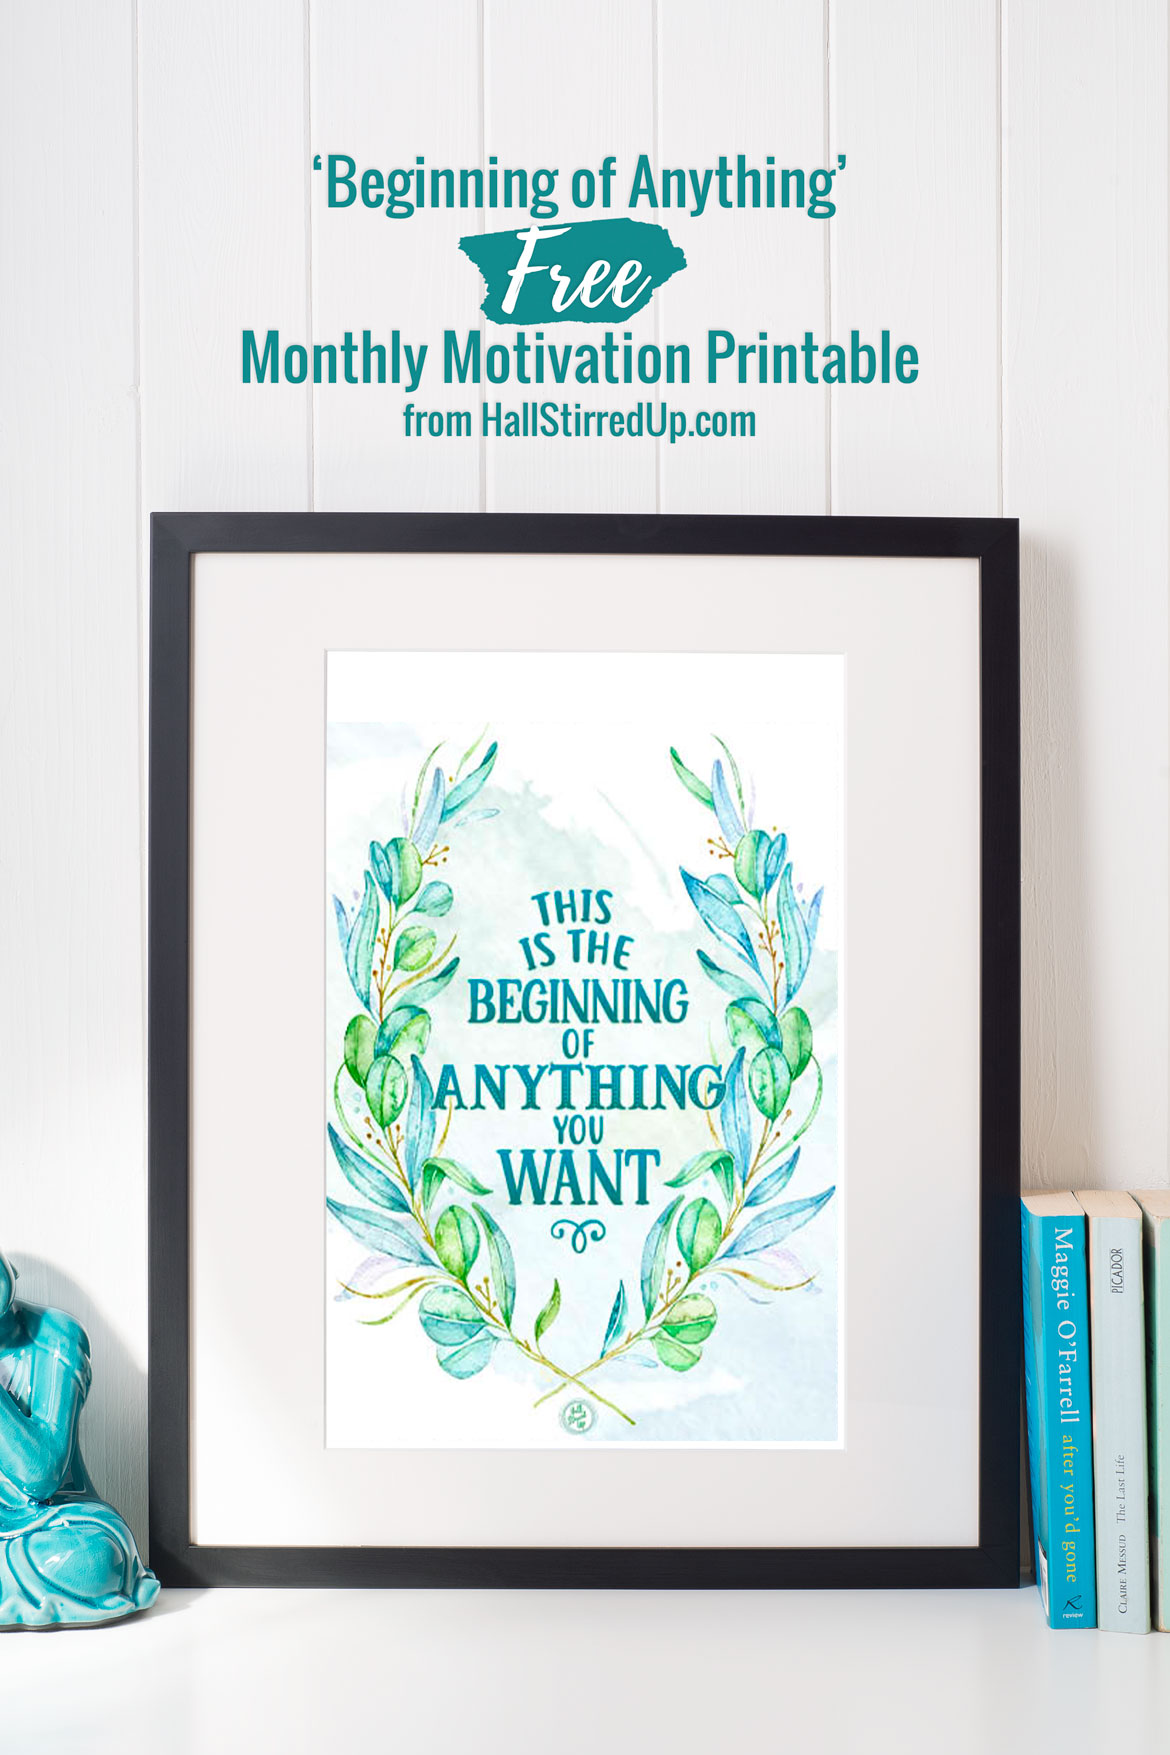 Unlock your potential with a new mindset Includes Beginning of Anything free printable